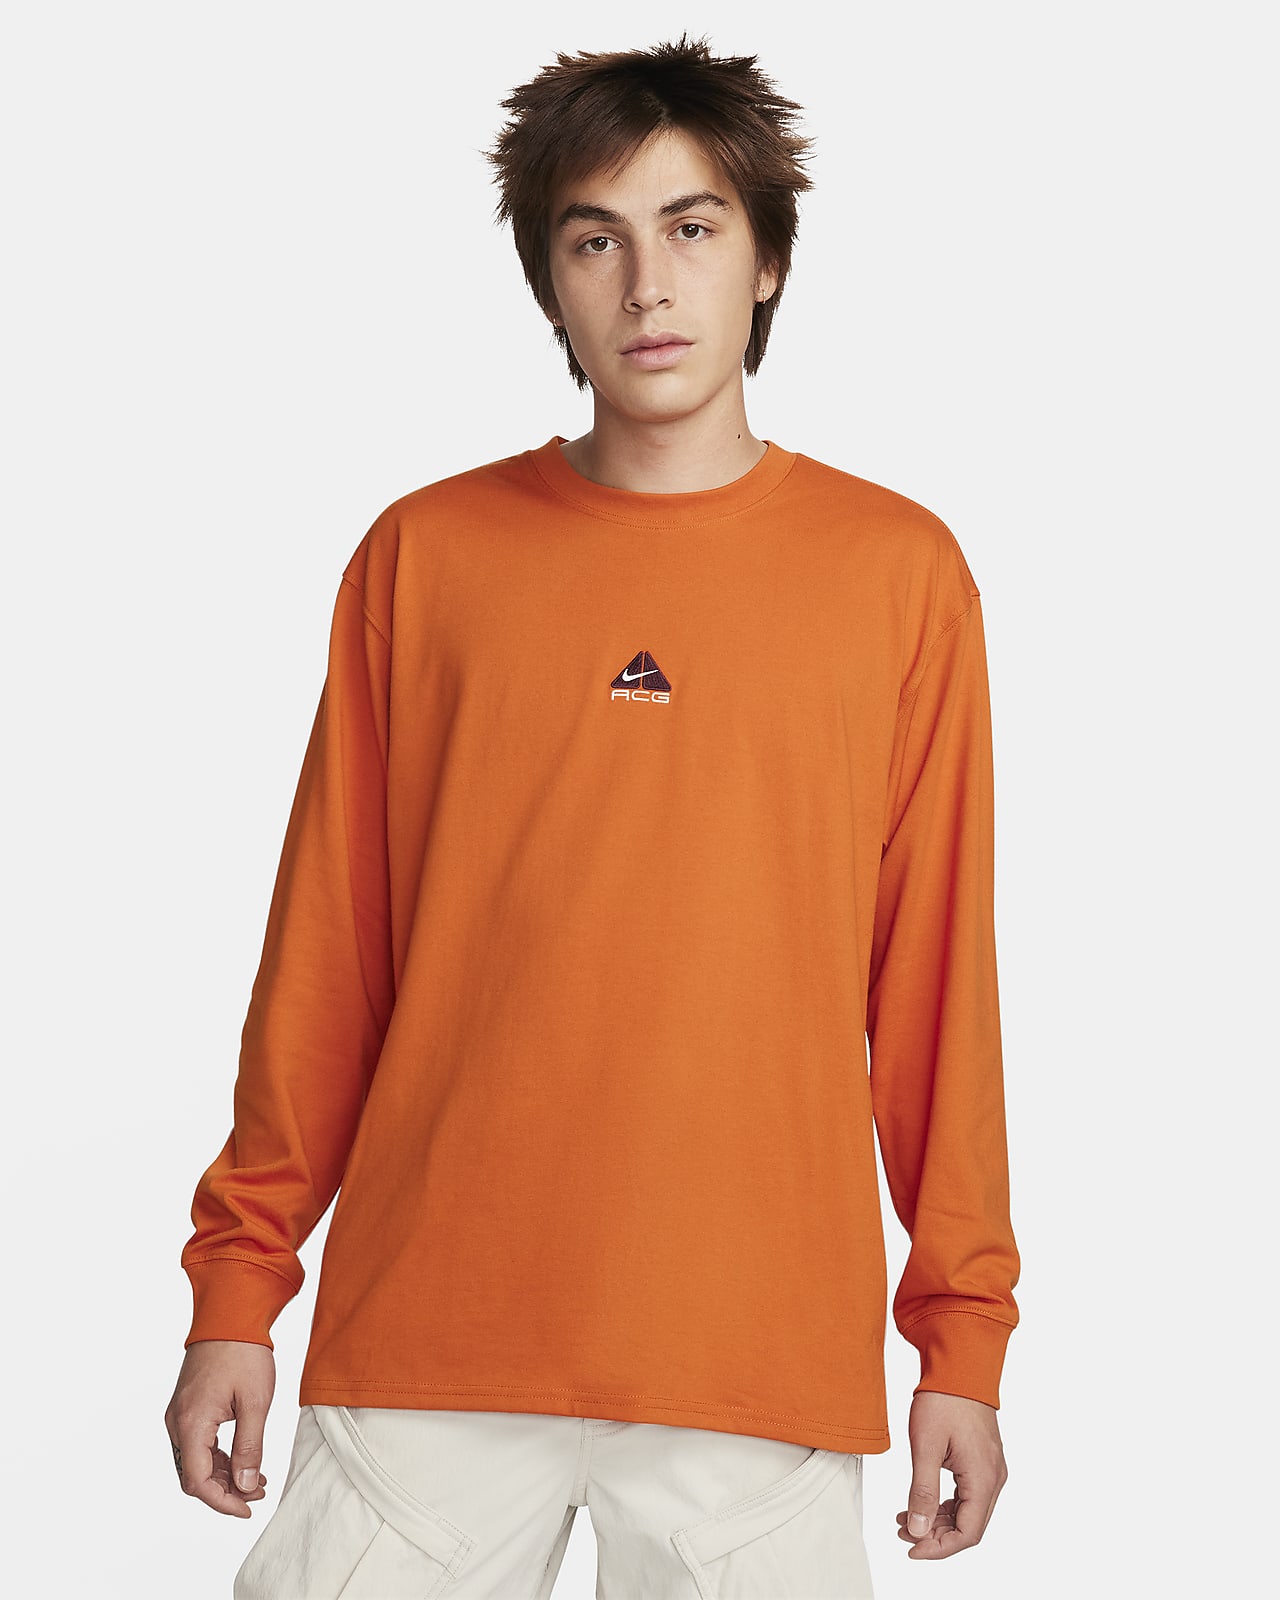 Tee-shirt à manches longues Nike ACG « Lungs » pour homme